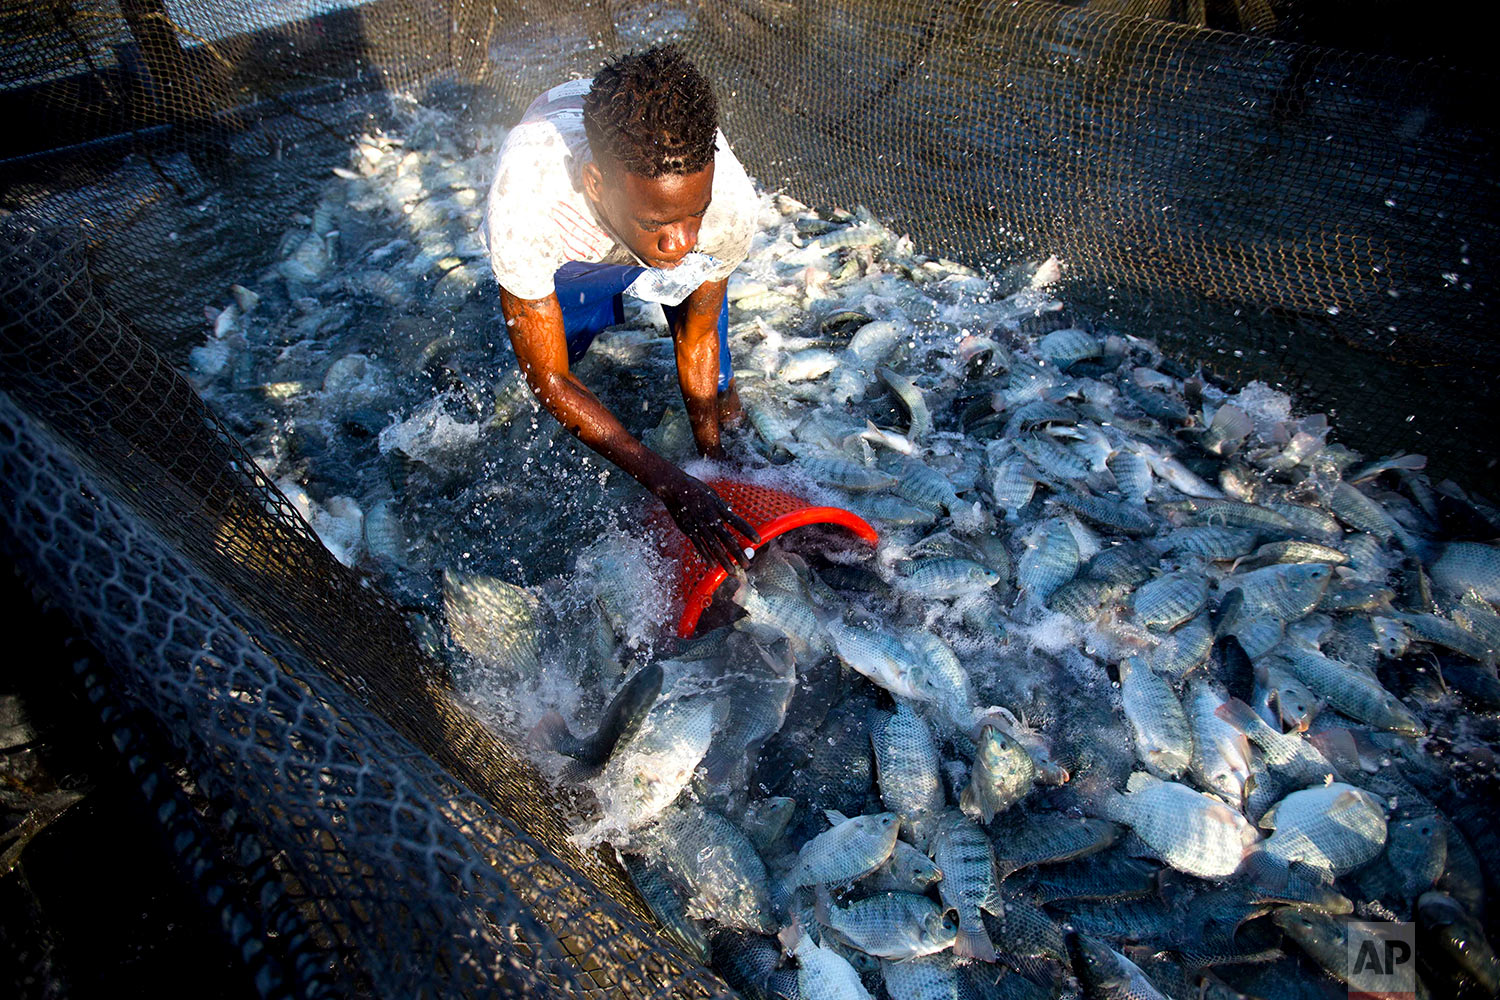  In this April 17, 2018 photo, Taino Aqua Fish worker Berthony Nelson removes tilapia from a cage in Lake Azuei Fond Parisien, Haiti. A week's crop can reach 20,000 pounds. (AP Photo/Dieu Nalio Chery) 